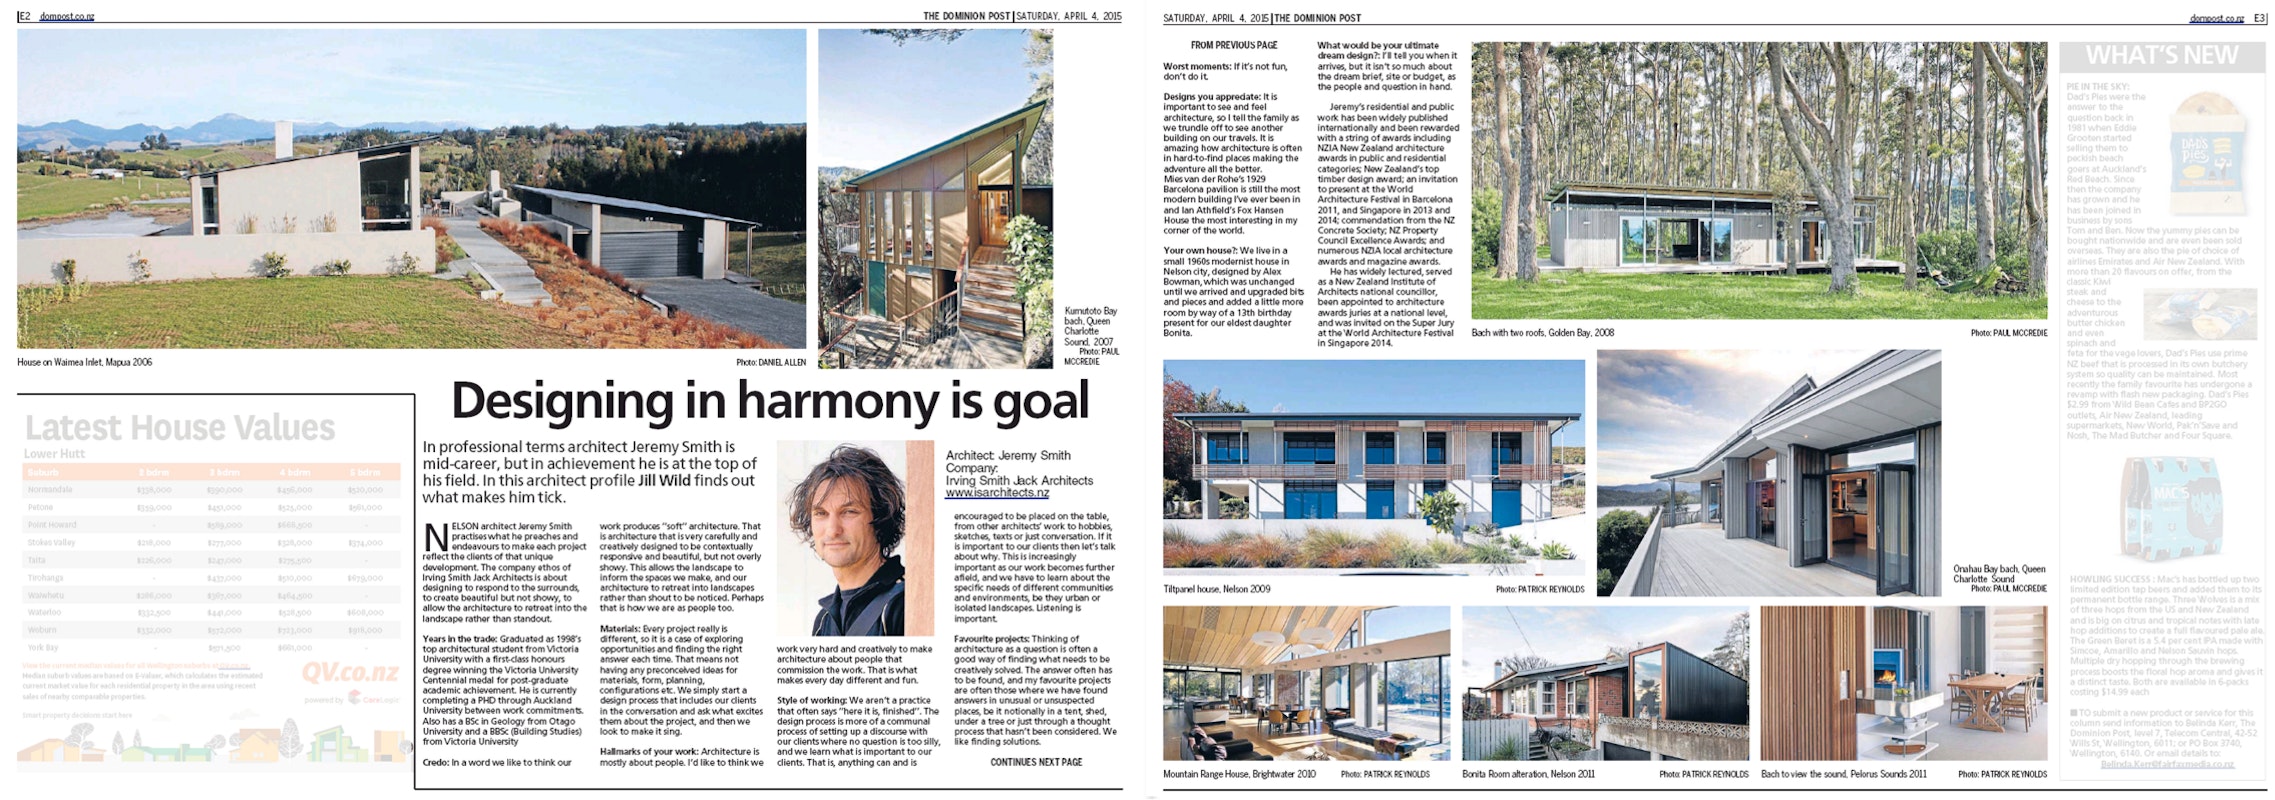 04.04.15 - Dominion Post Feature Irving Smith Architects